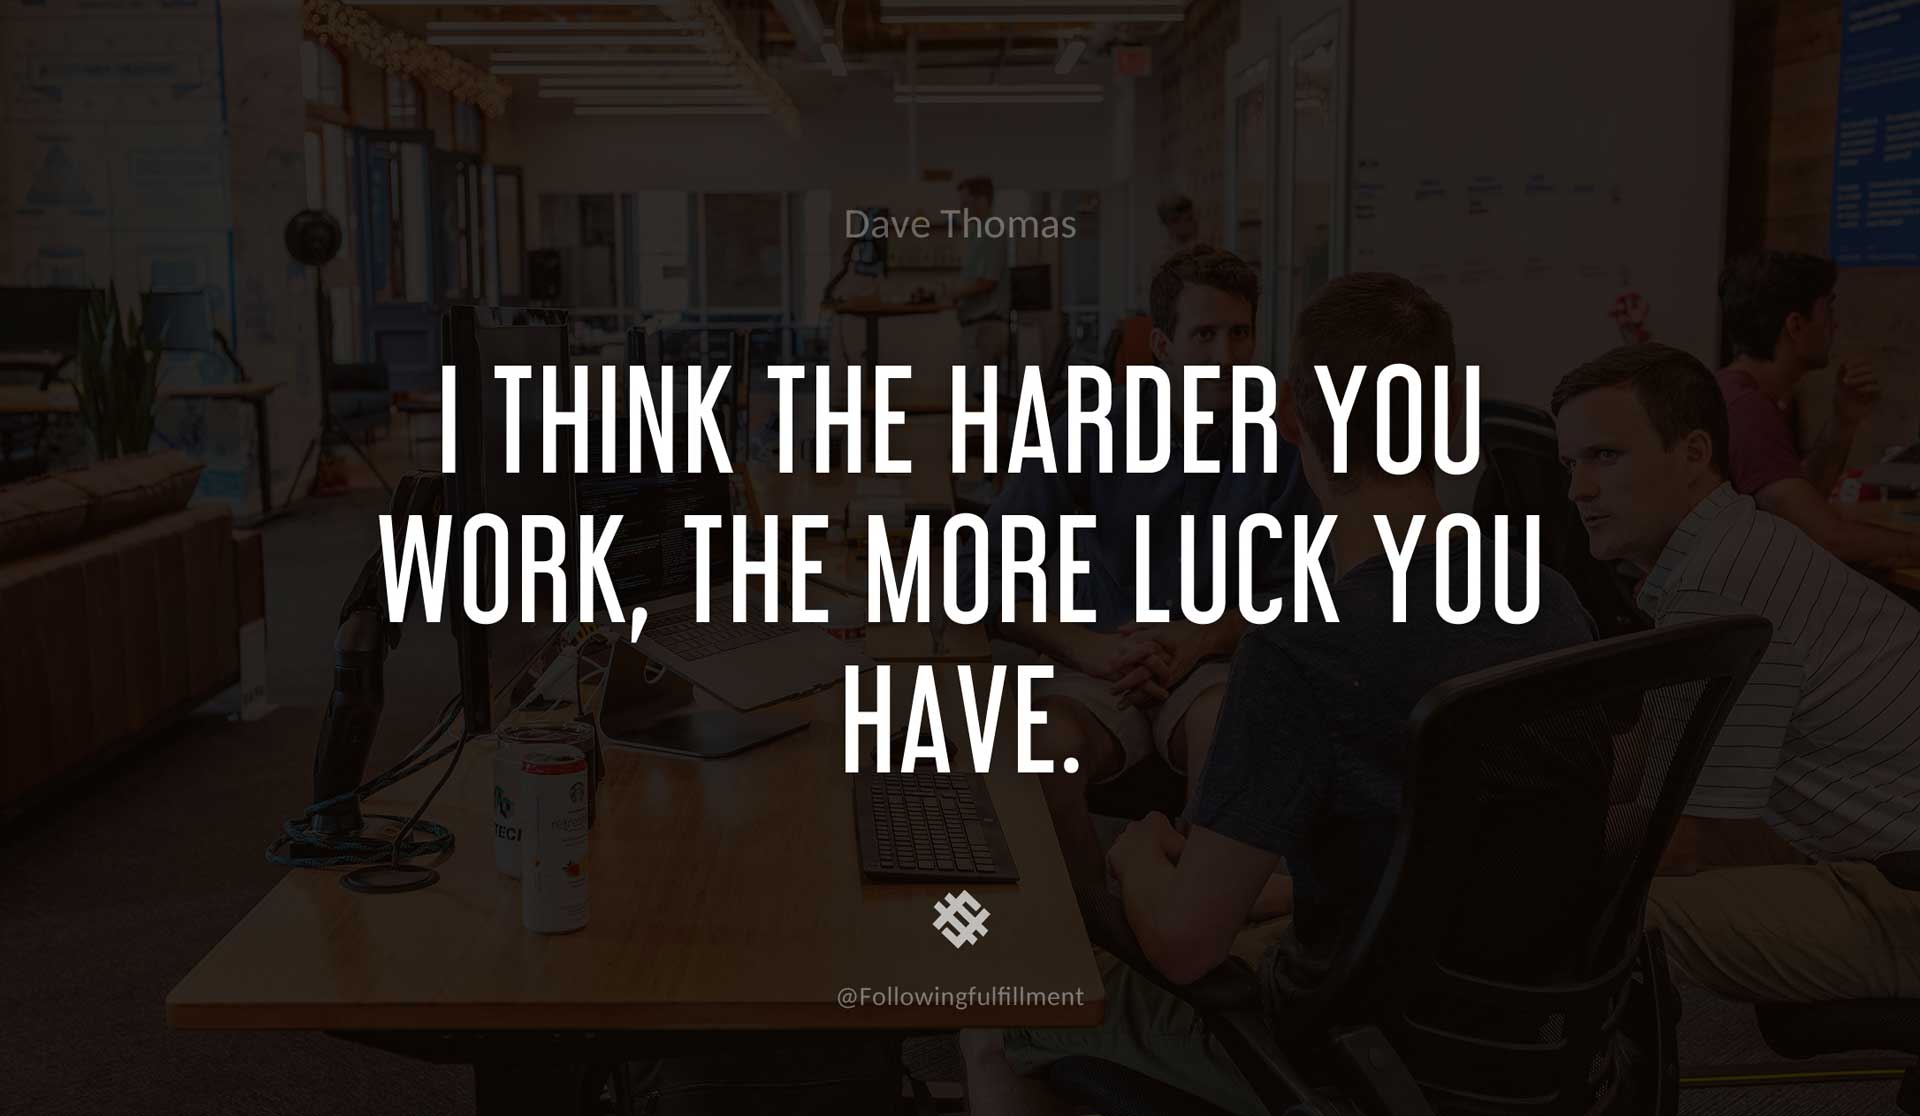 I-think-the-harder-you-work,-the-more-luck-you-have.-DAVE-THOMAS-Quote.jpg